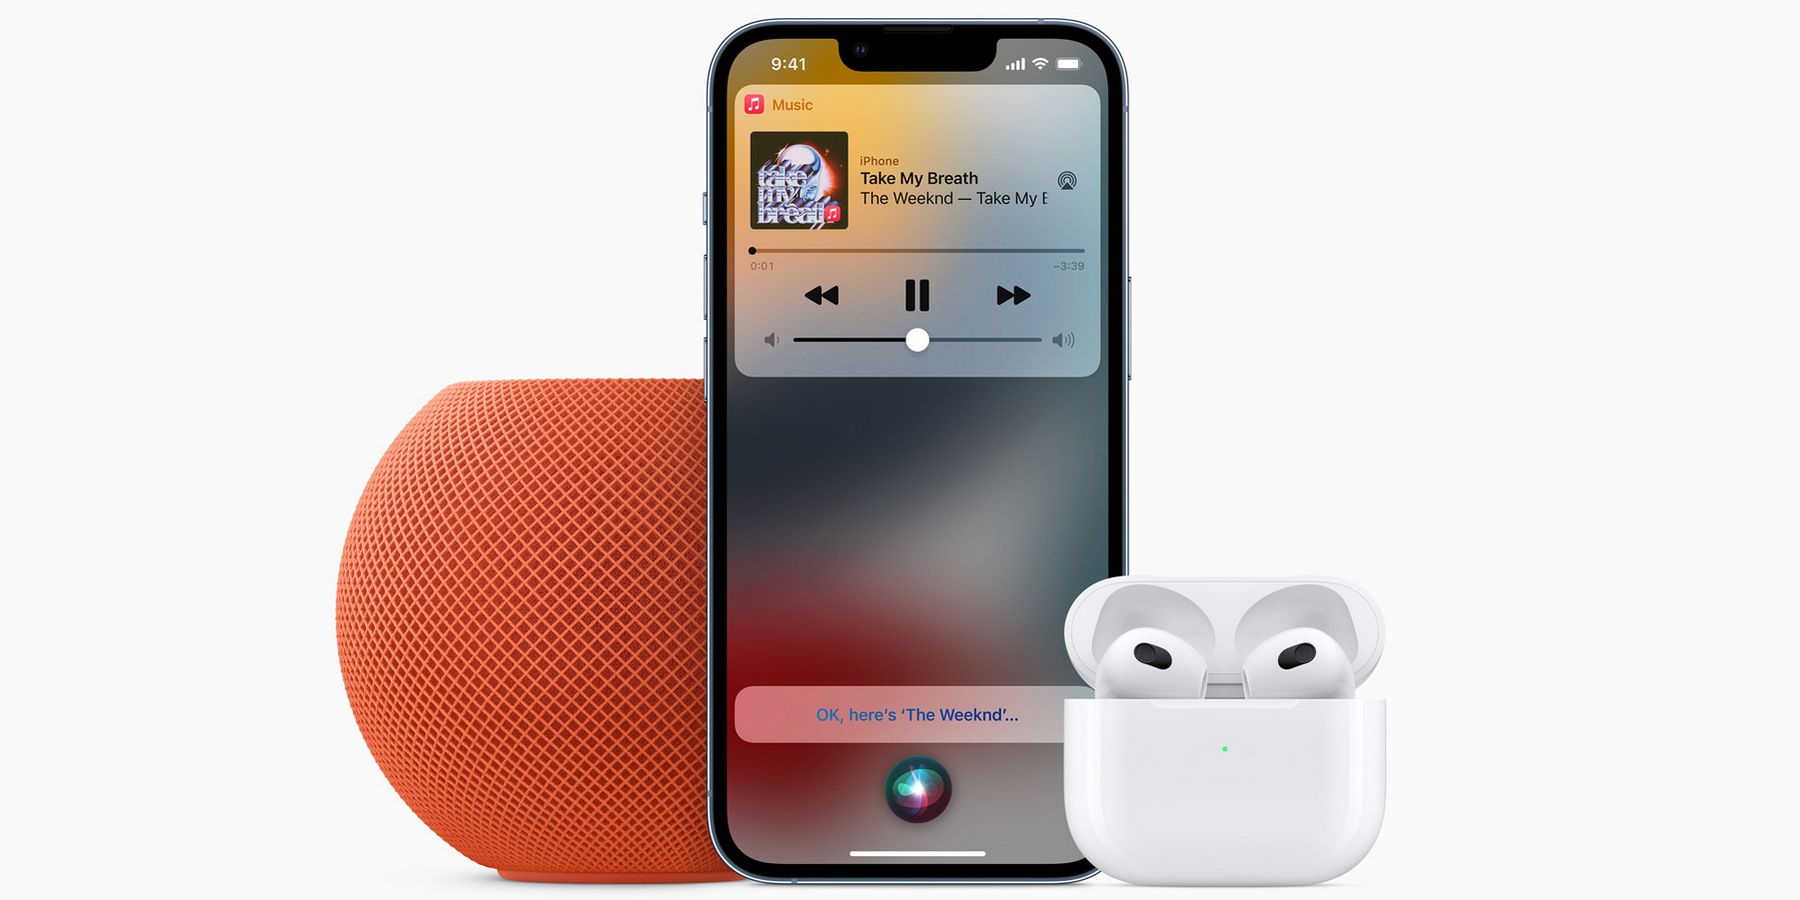 All The Drawbacks Of Apples $5 Apple Music Voice Plan